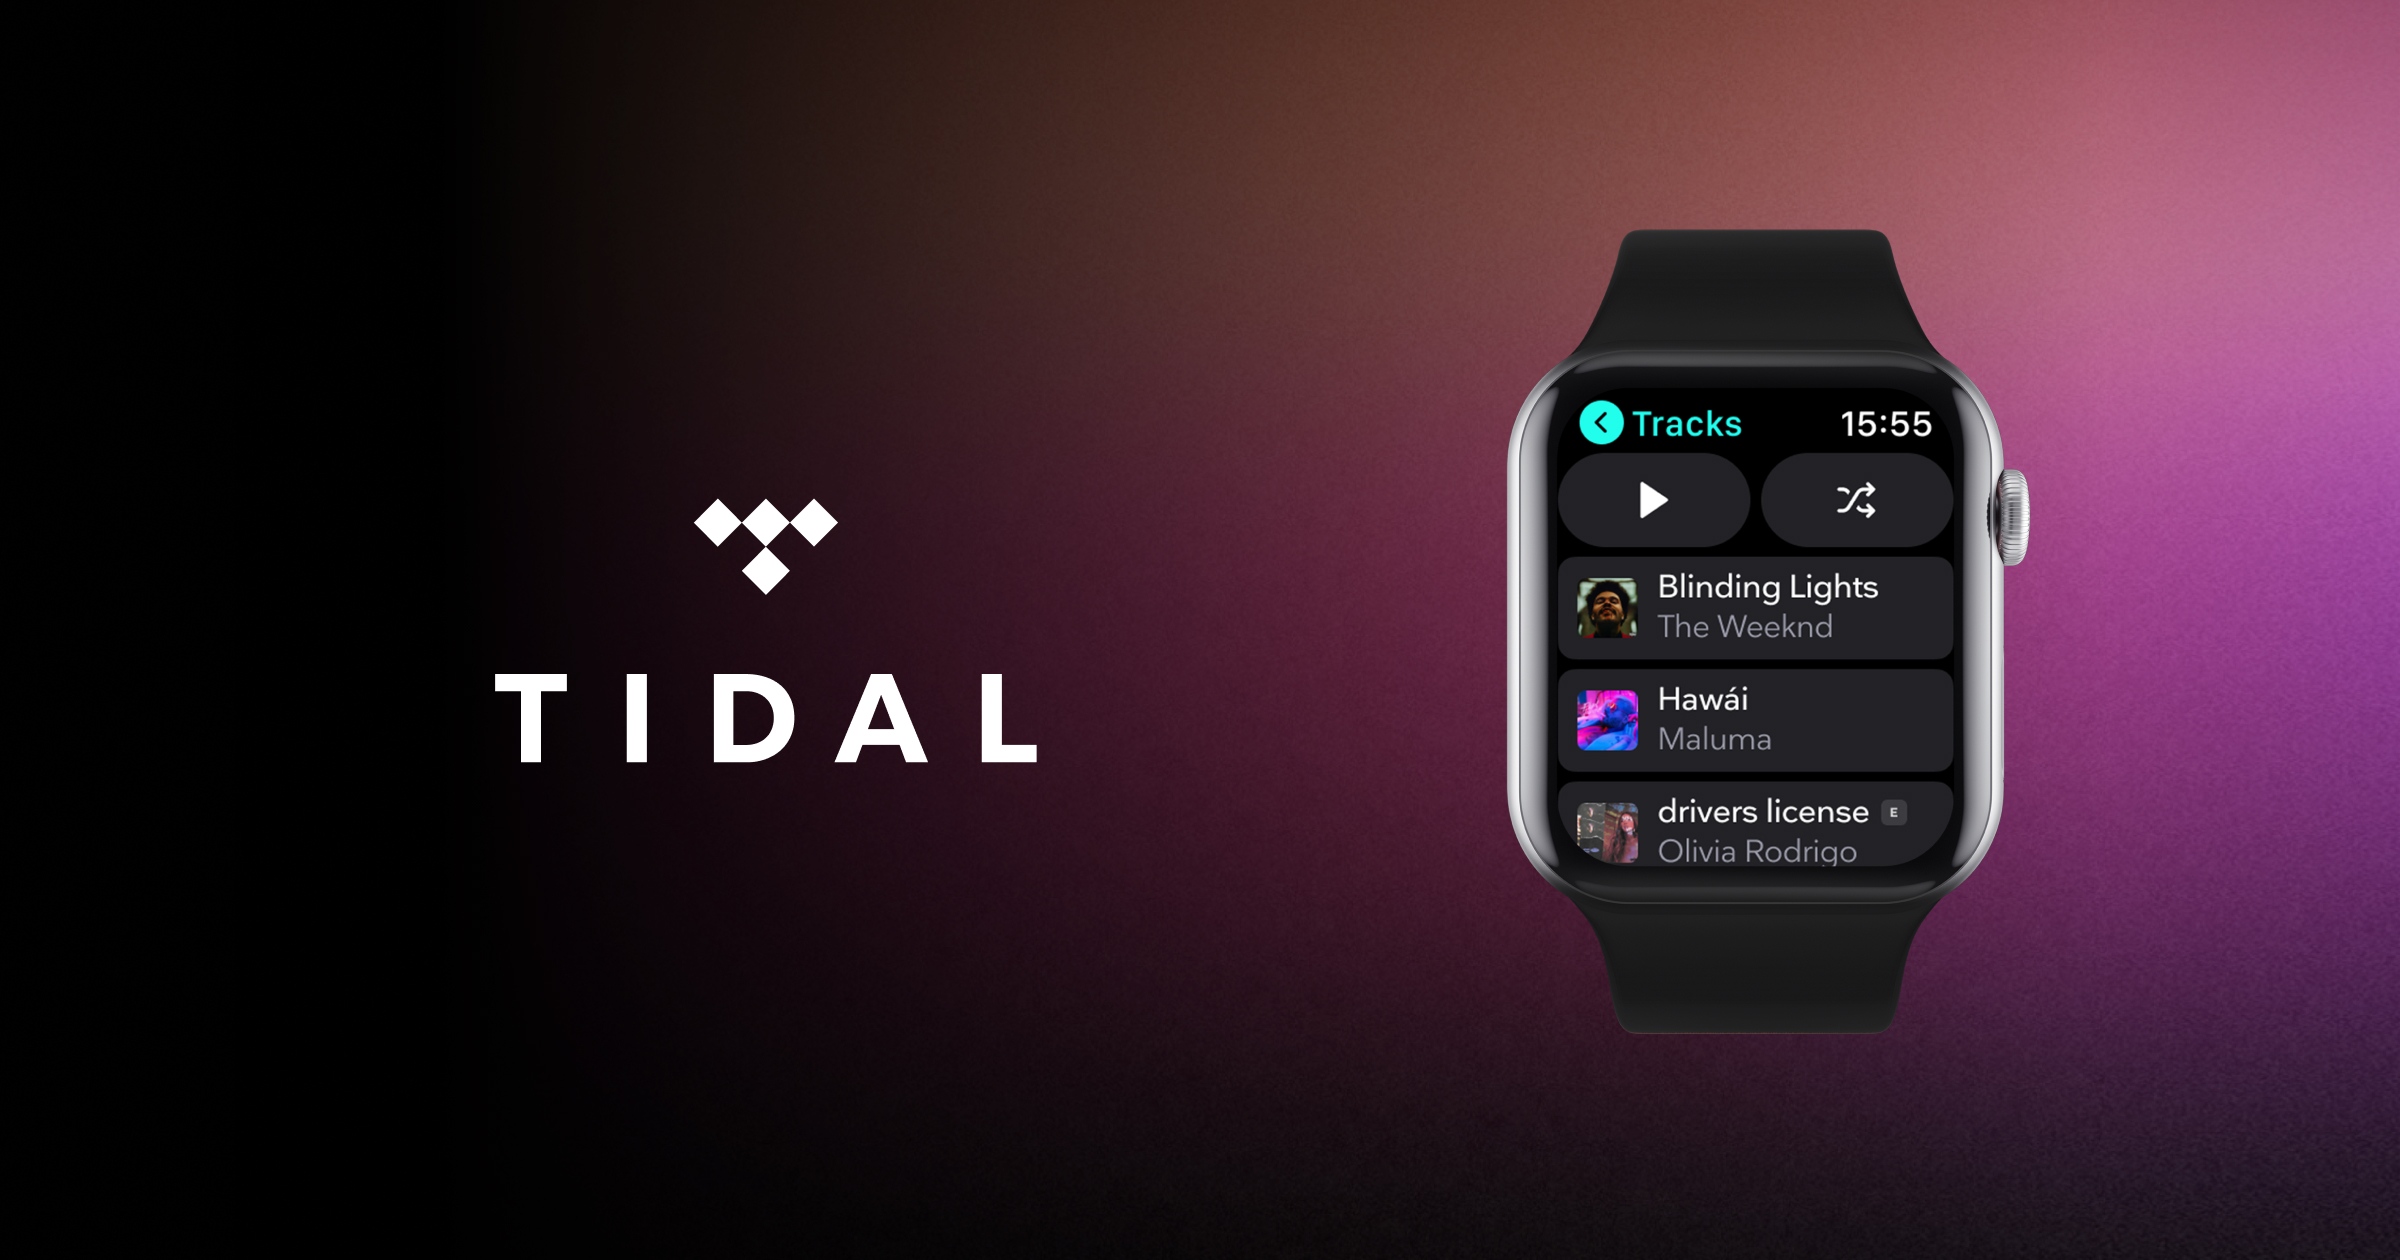 launches Apple Watch with streaming offline playback as competition - 9to5Mac